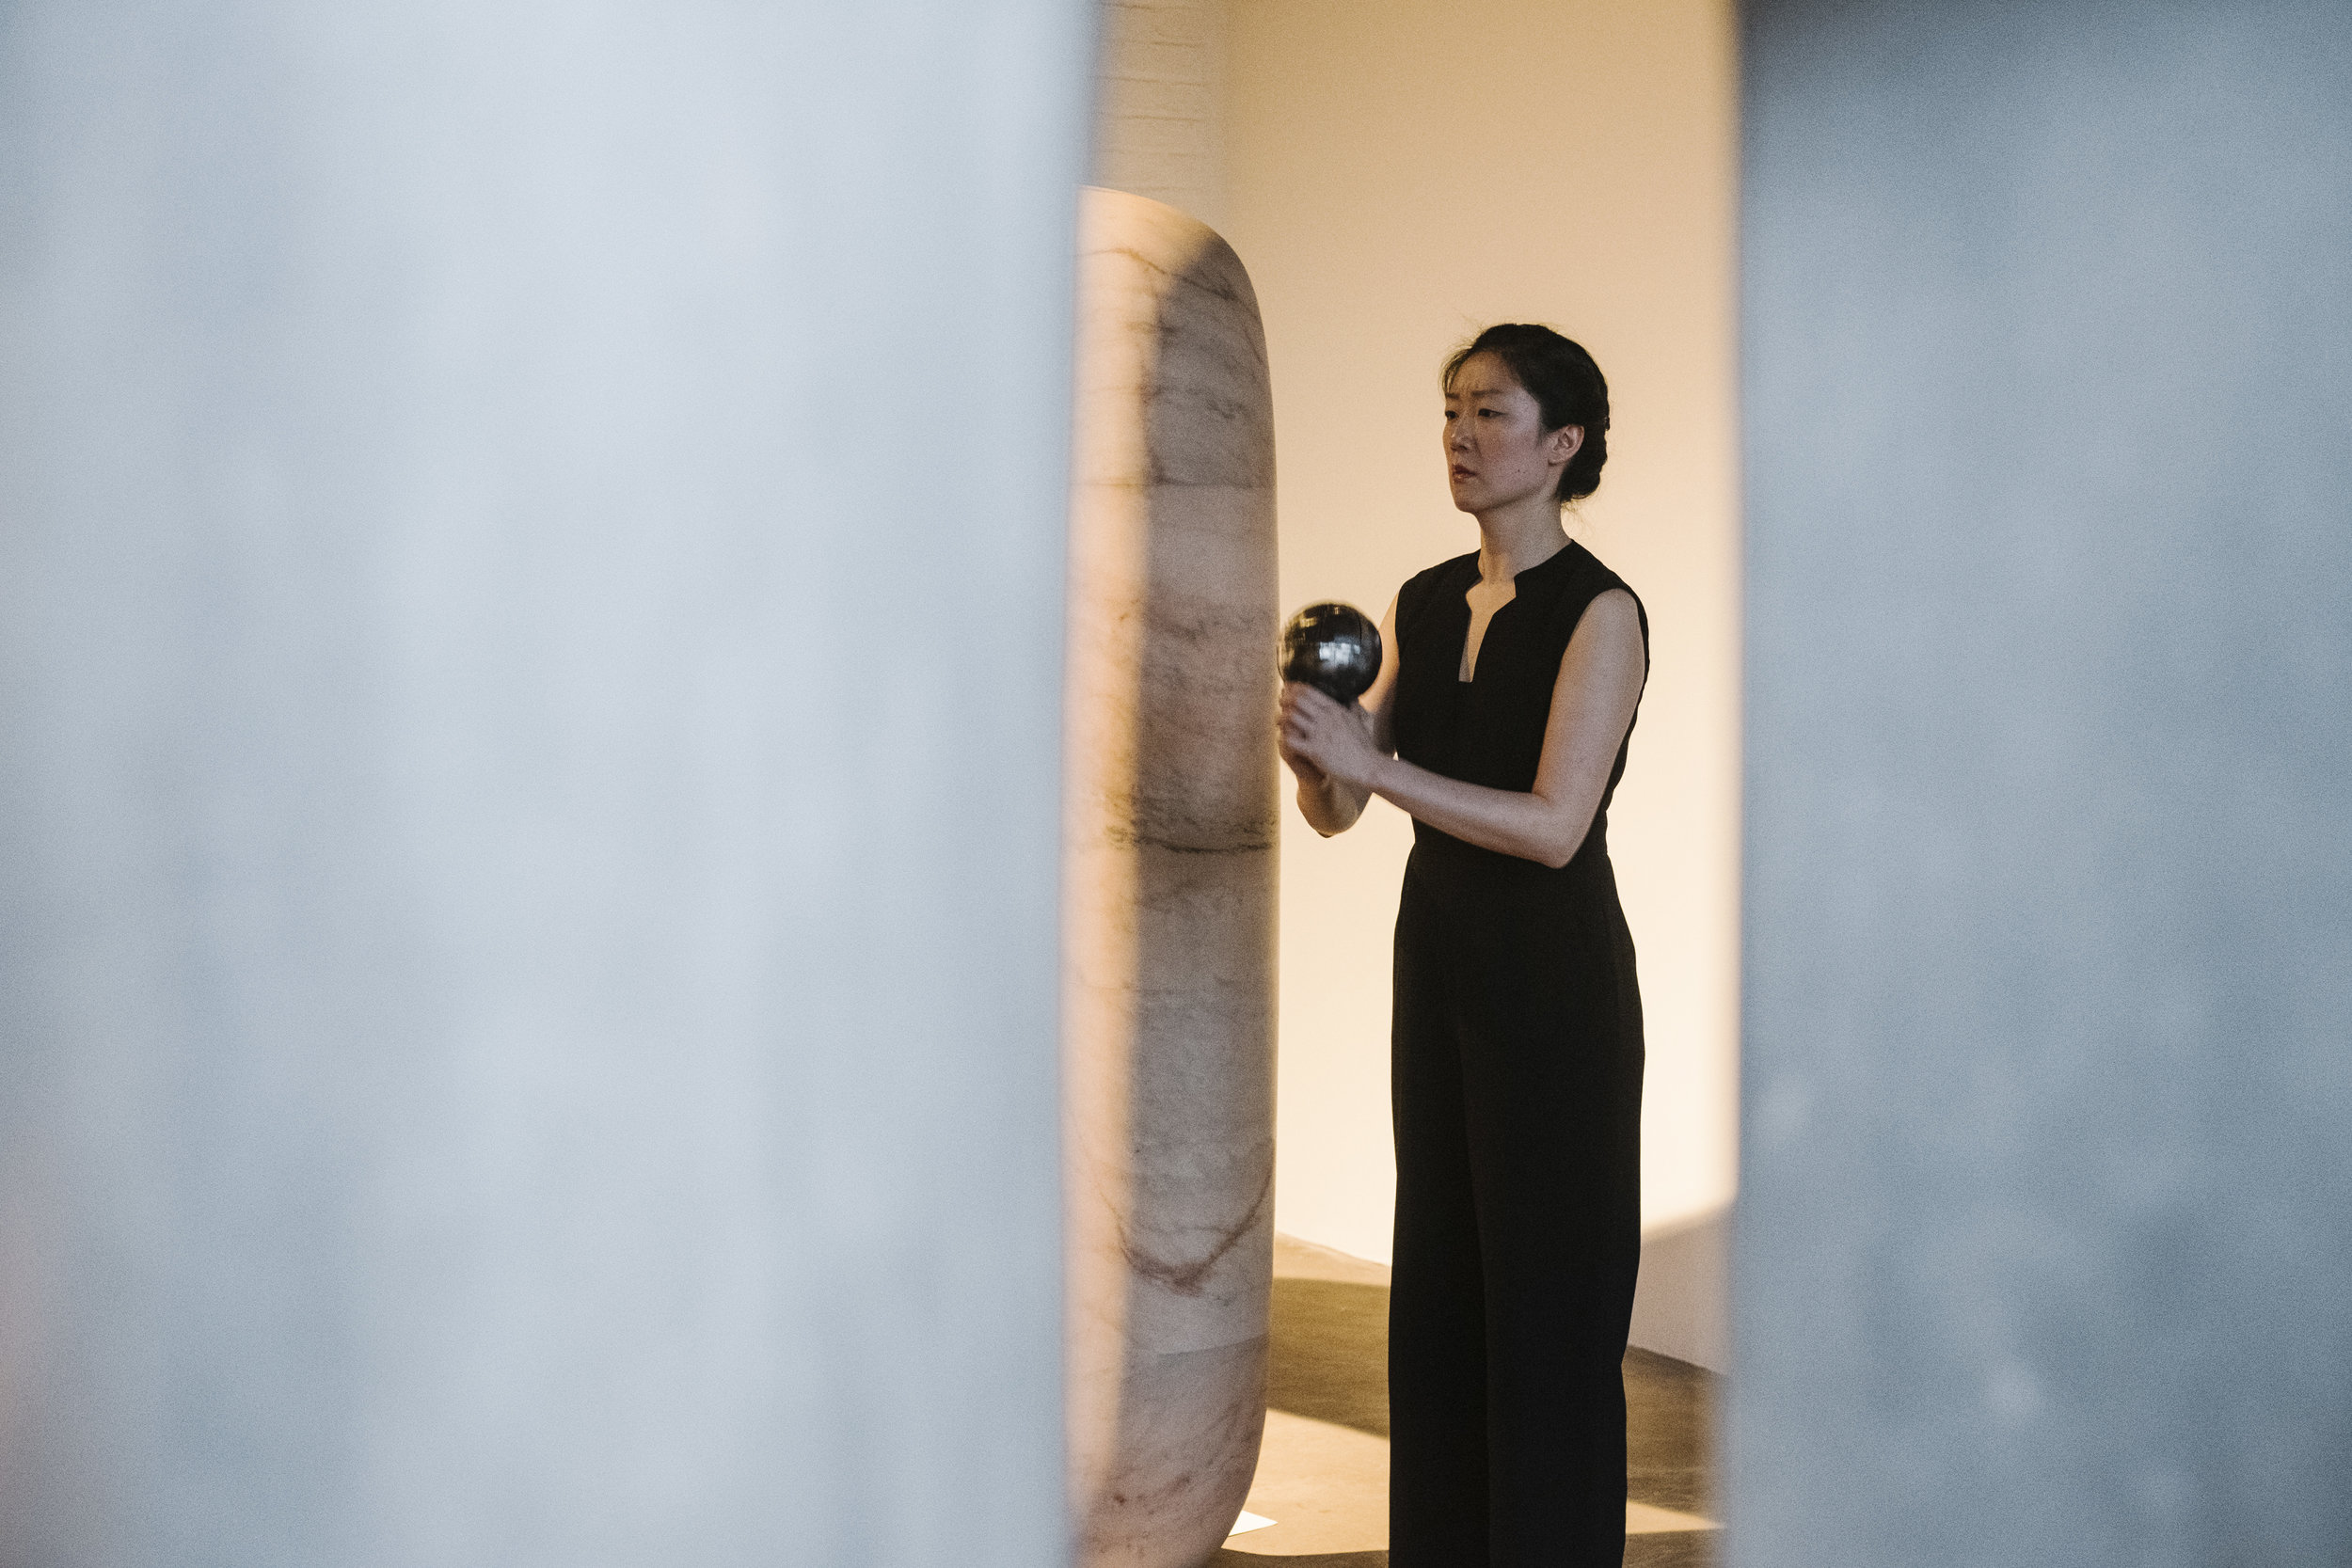 40-2019-06-13-changing-and-unchanging-sound-noguchi-museum-photo-by-don-stahl.JPG